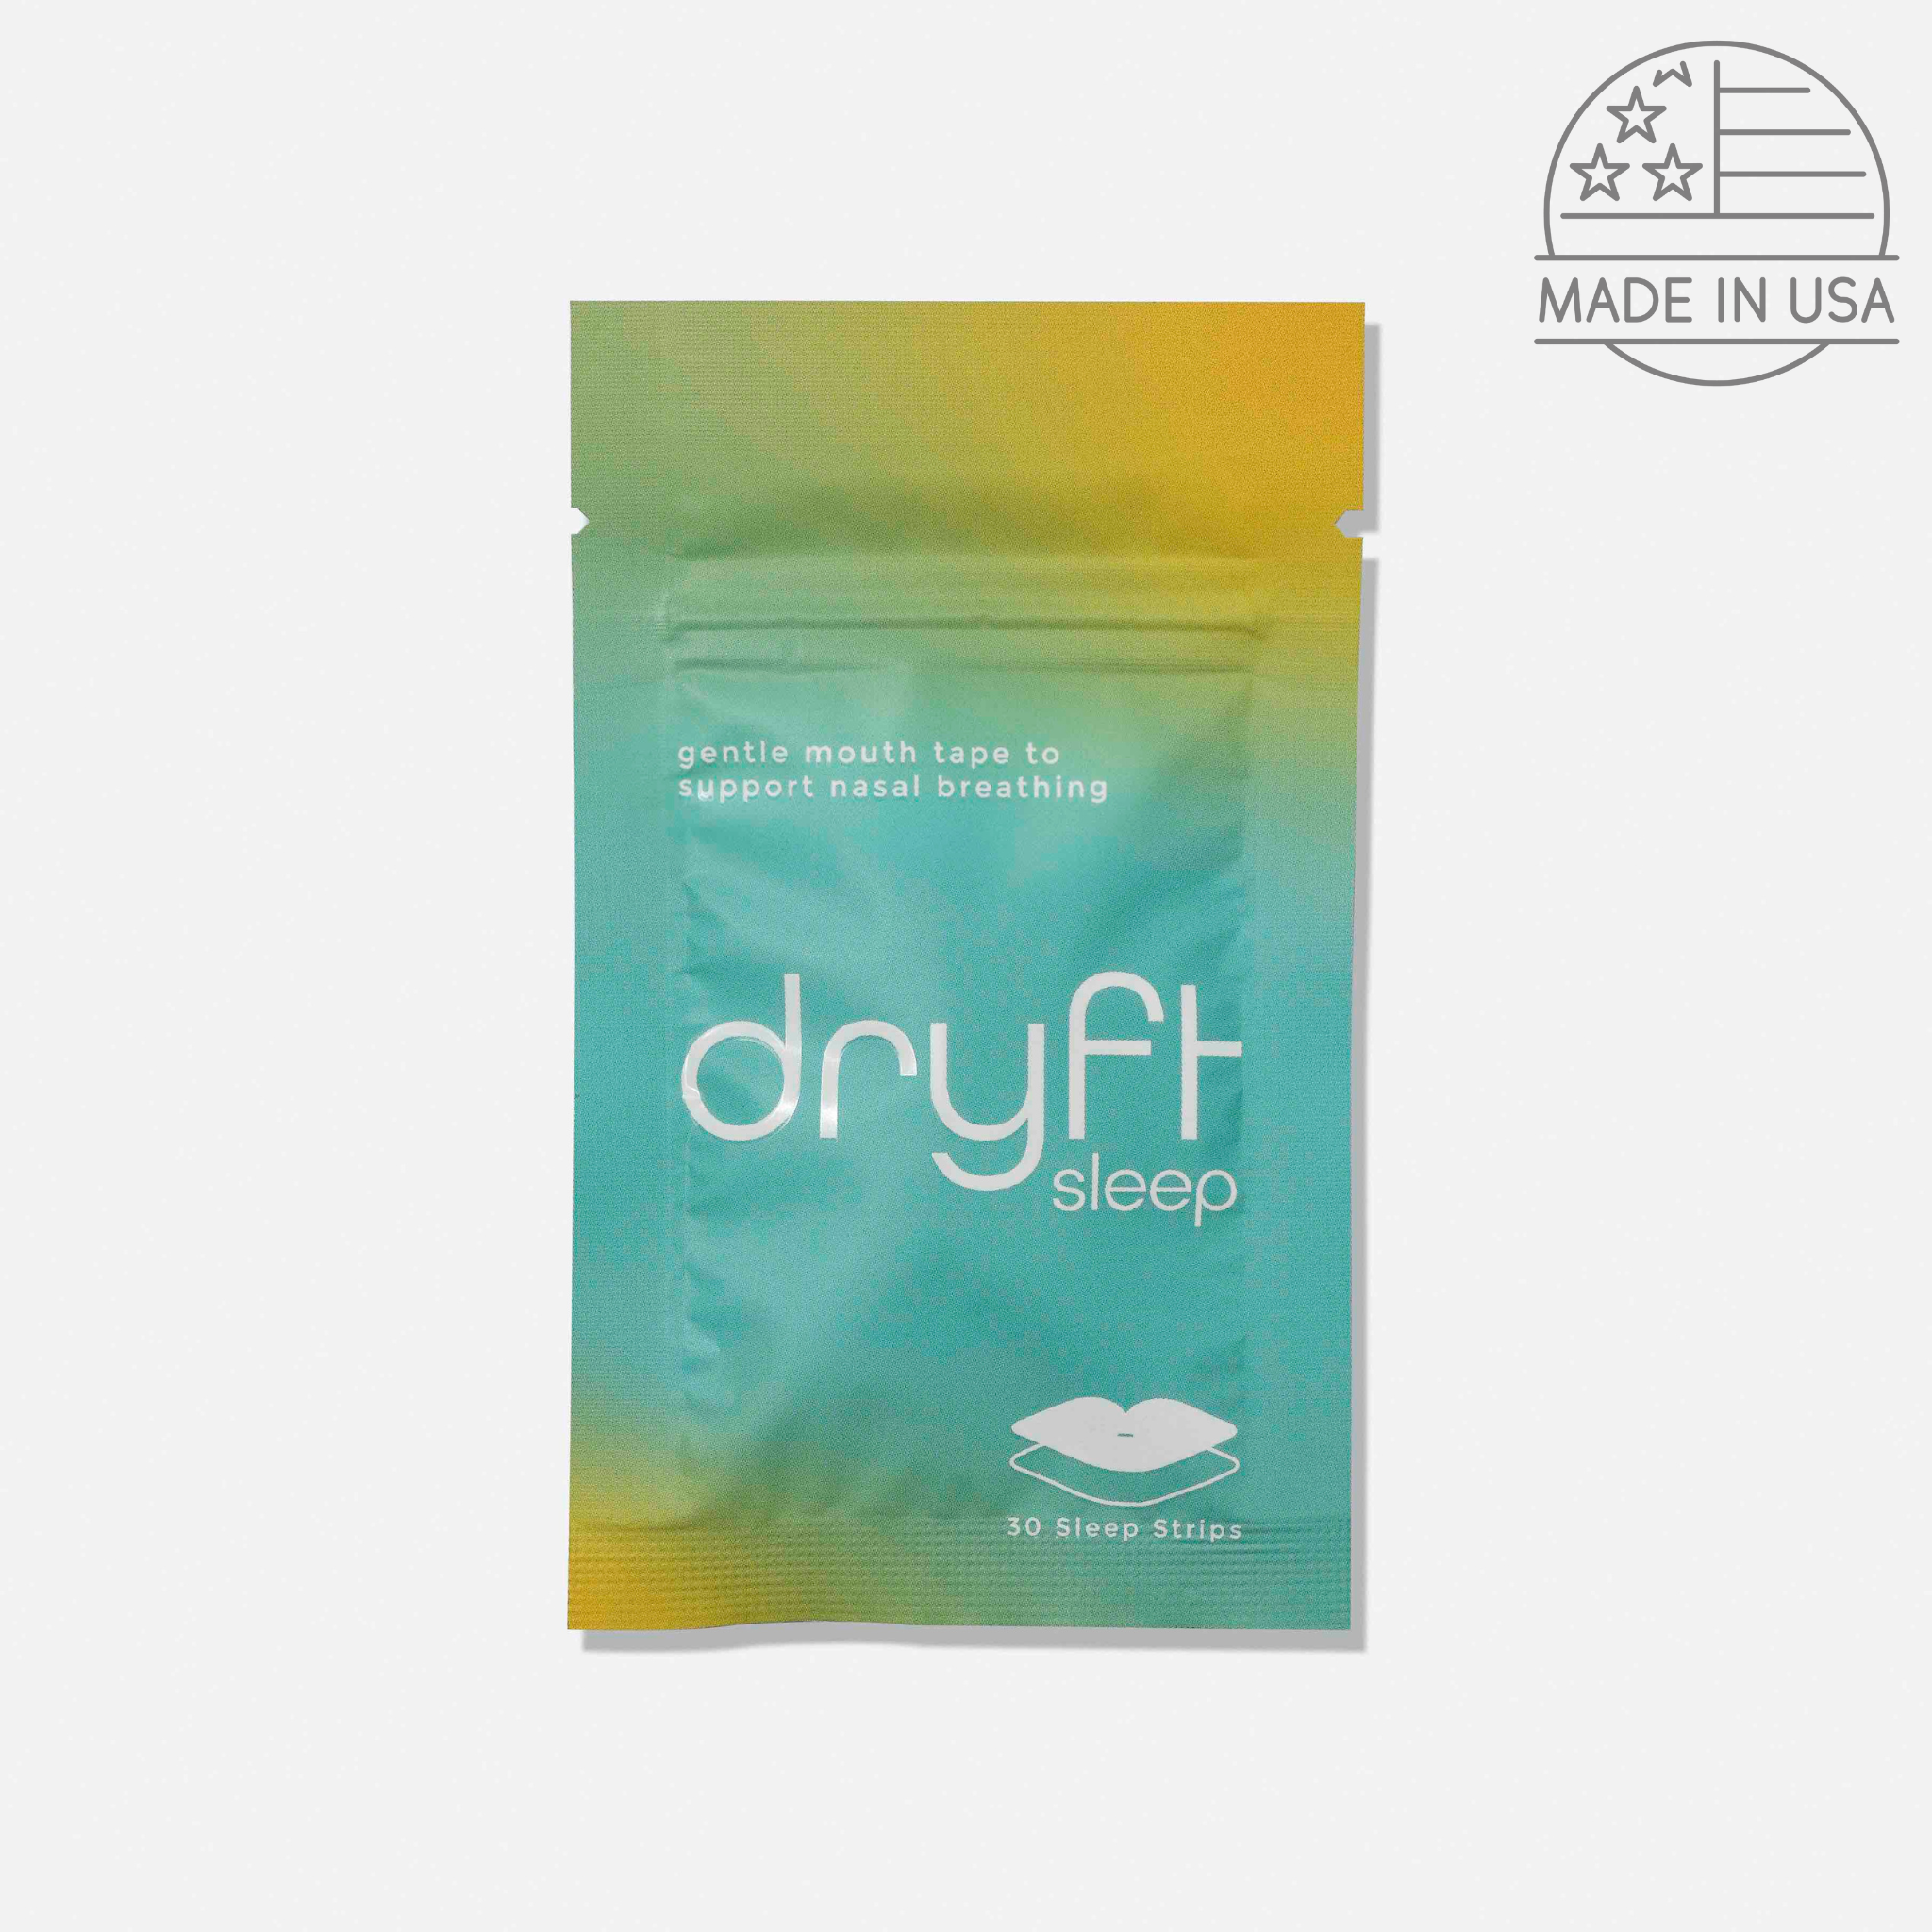 Dryft Mouth Tape